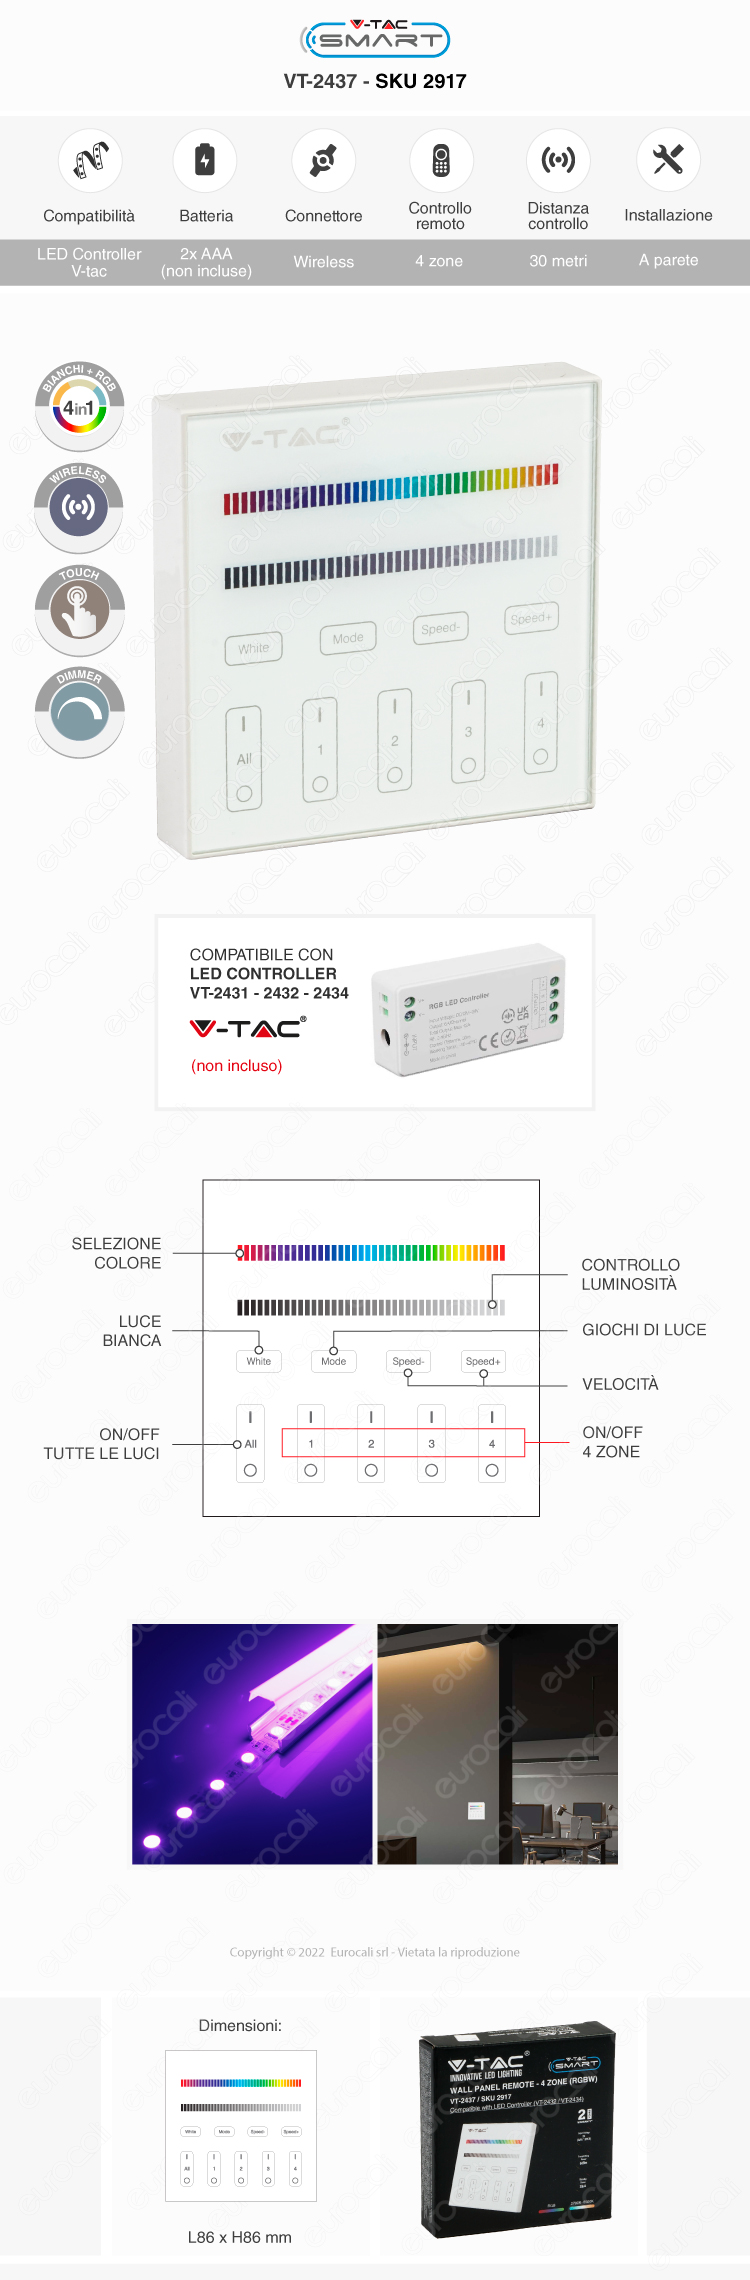 v-tac smart vt-2437 wall panel touch dimmer wireless per strisce led rgb+w